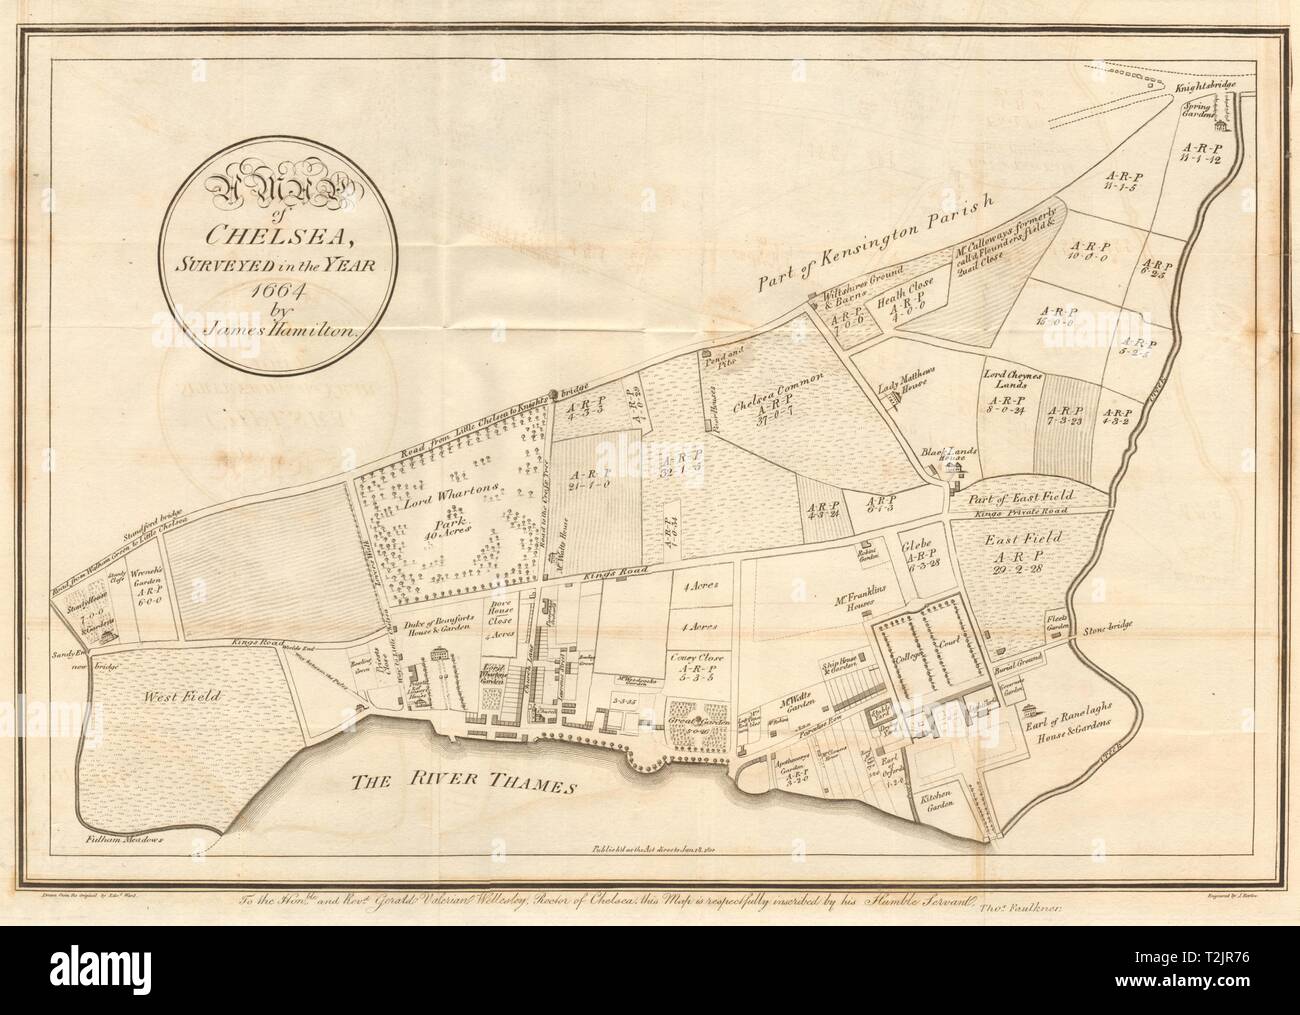 'Map of Chelsea surveyed in the year 1664 by James Hamilton'. FAULKNER 1810 Stock Photo